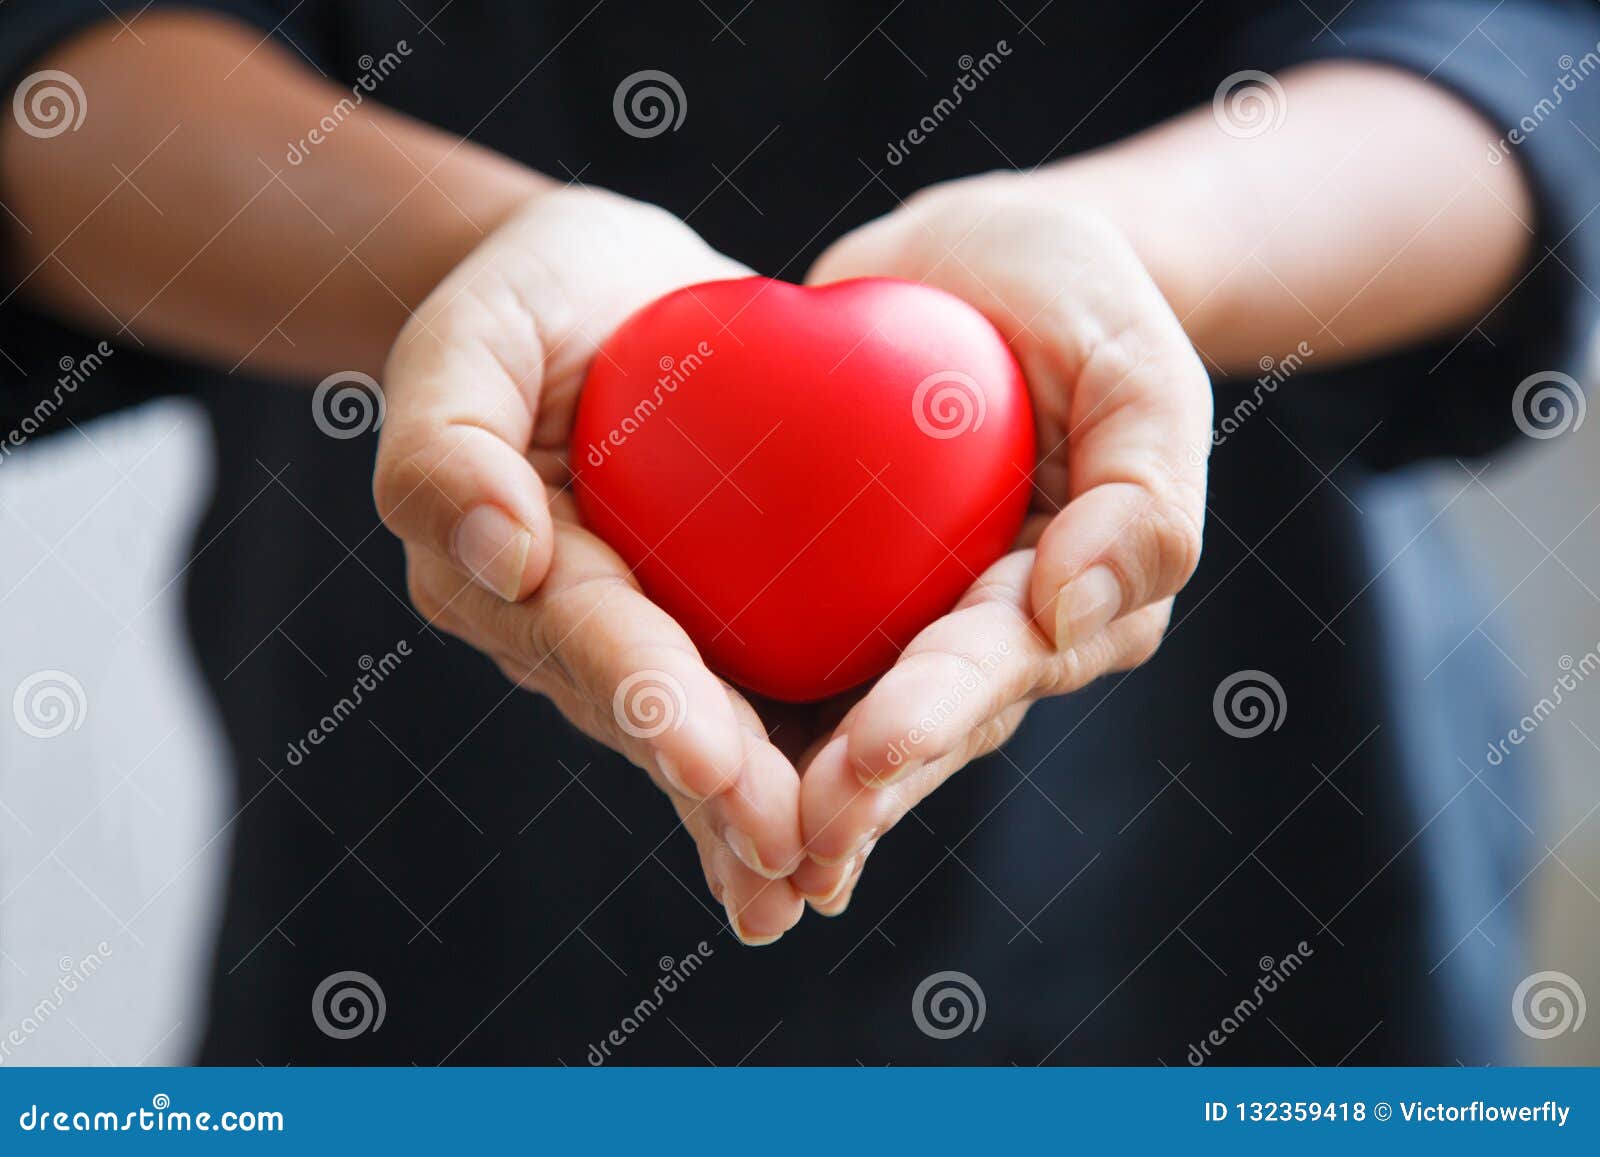 red heart held by female`s both hands, represent helping hands, caring, love, sympathy, condolence, customer relationship, patient